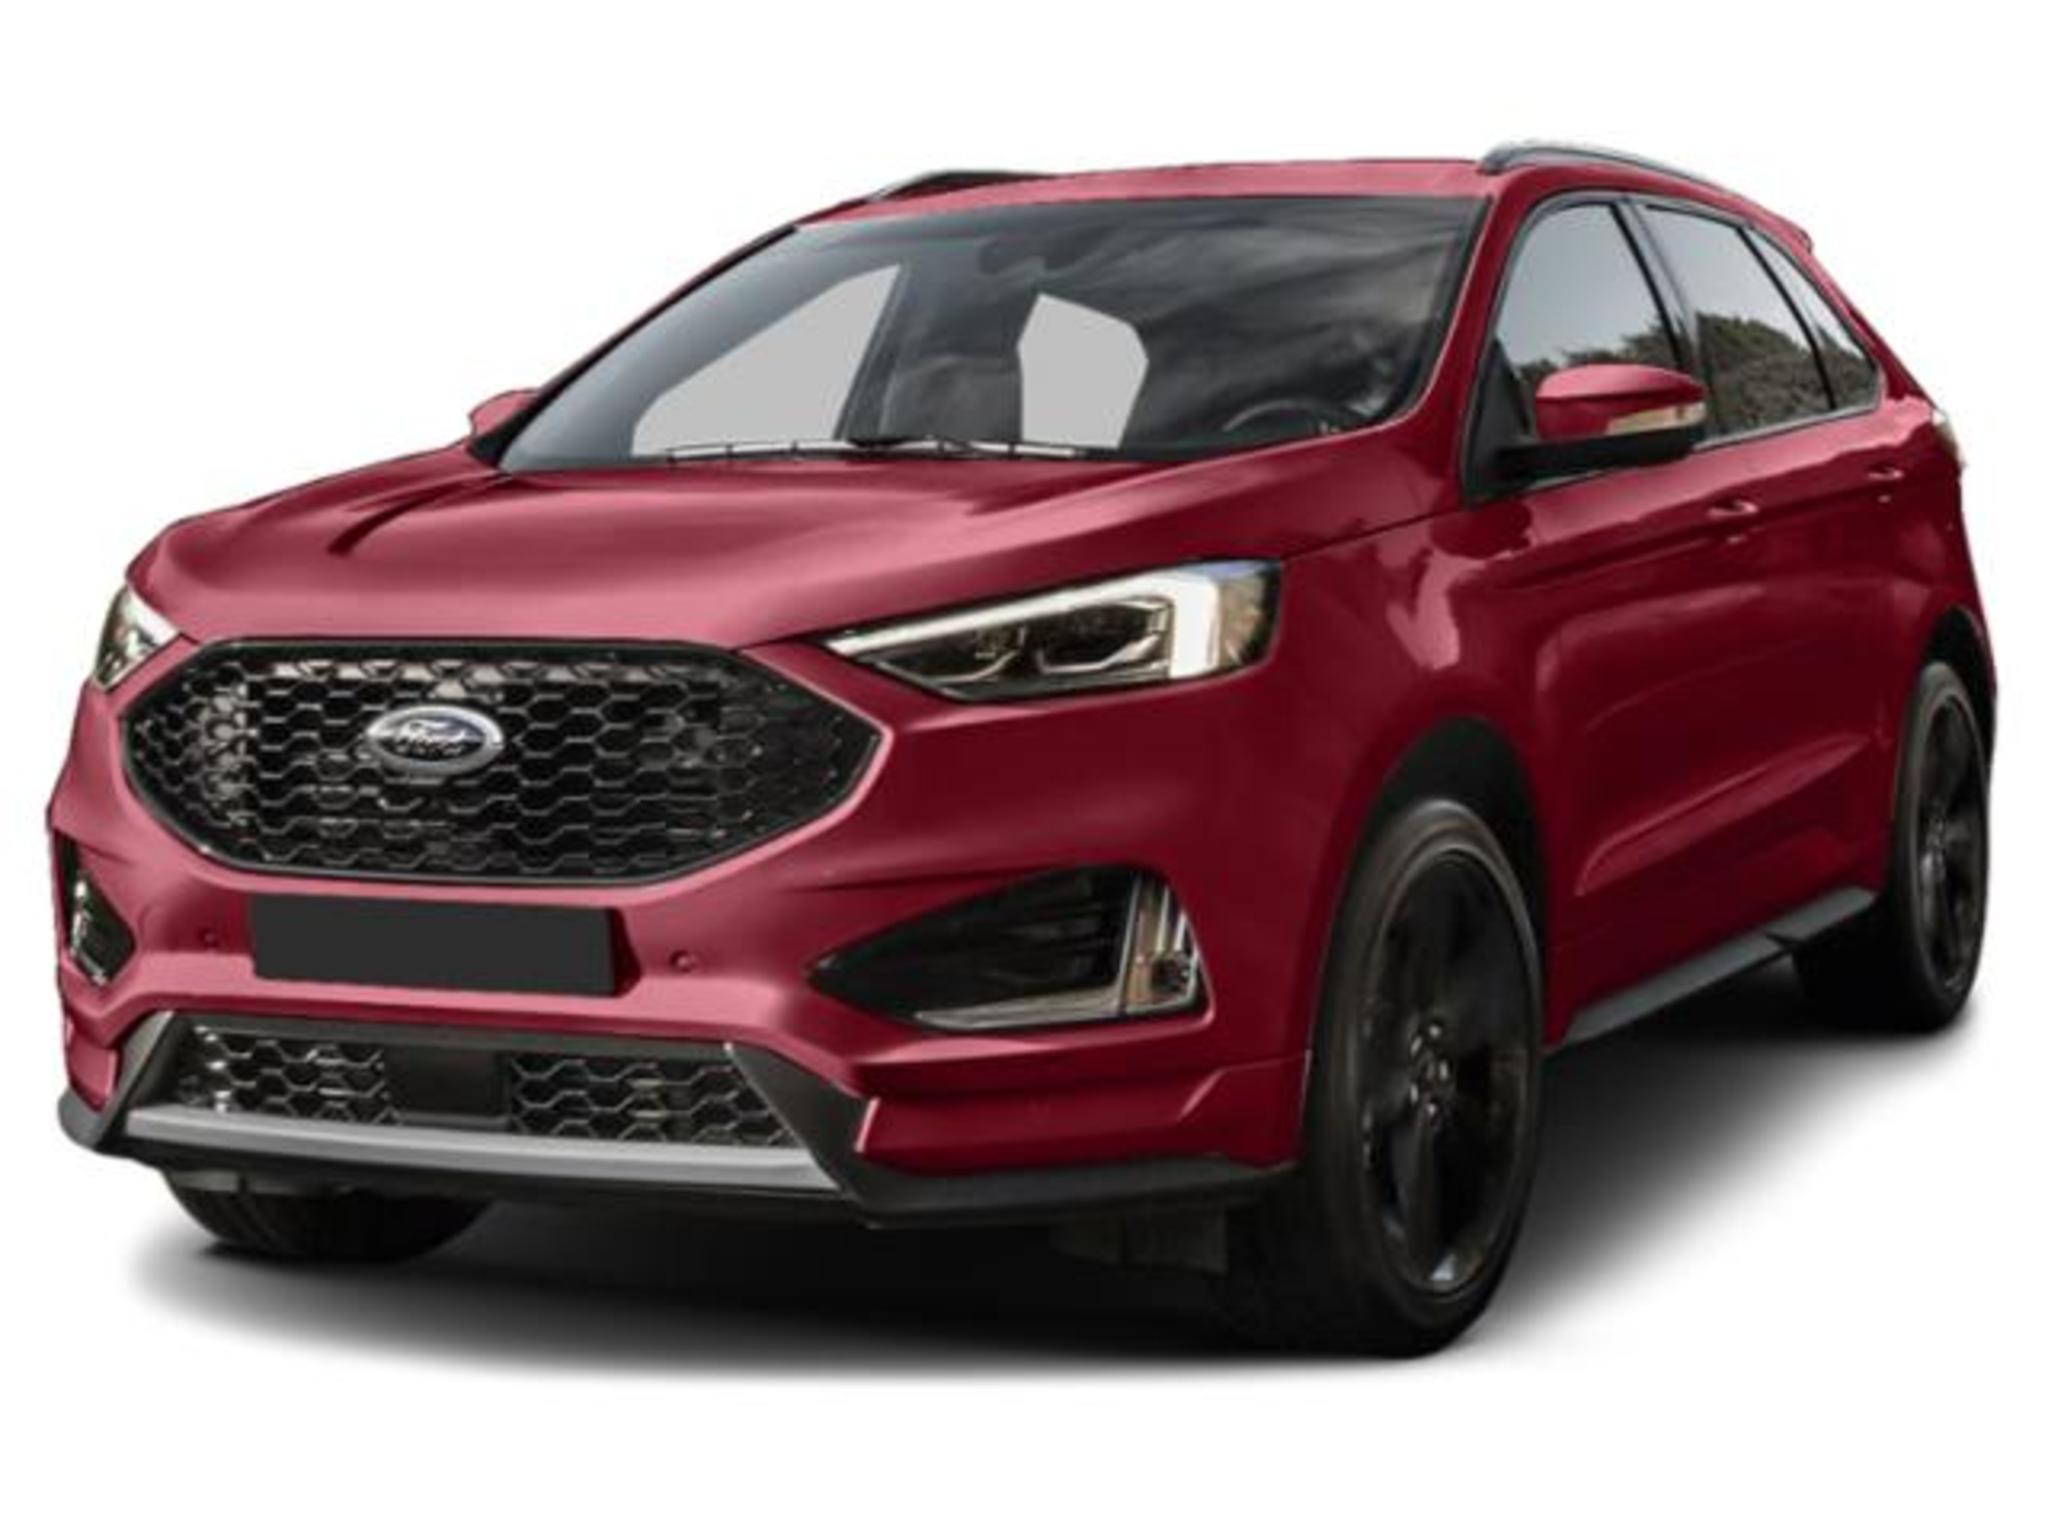 2019 Ford Edge - Compare Prices, Trims, Options, Specs, Photos, Reviews